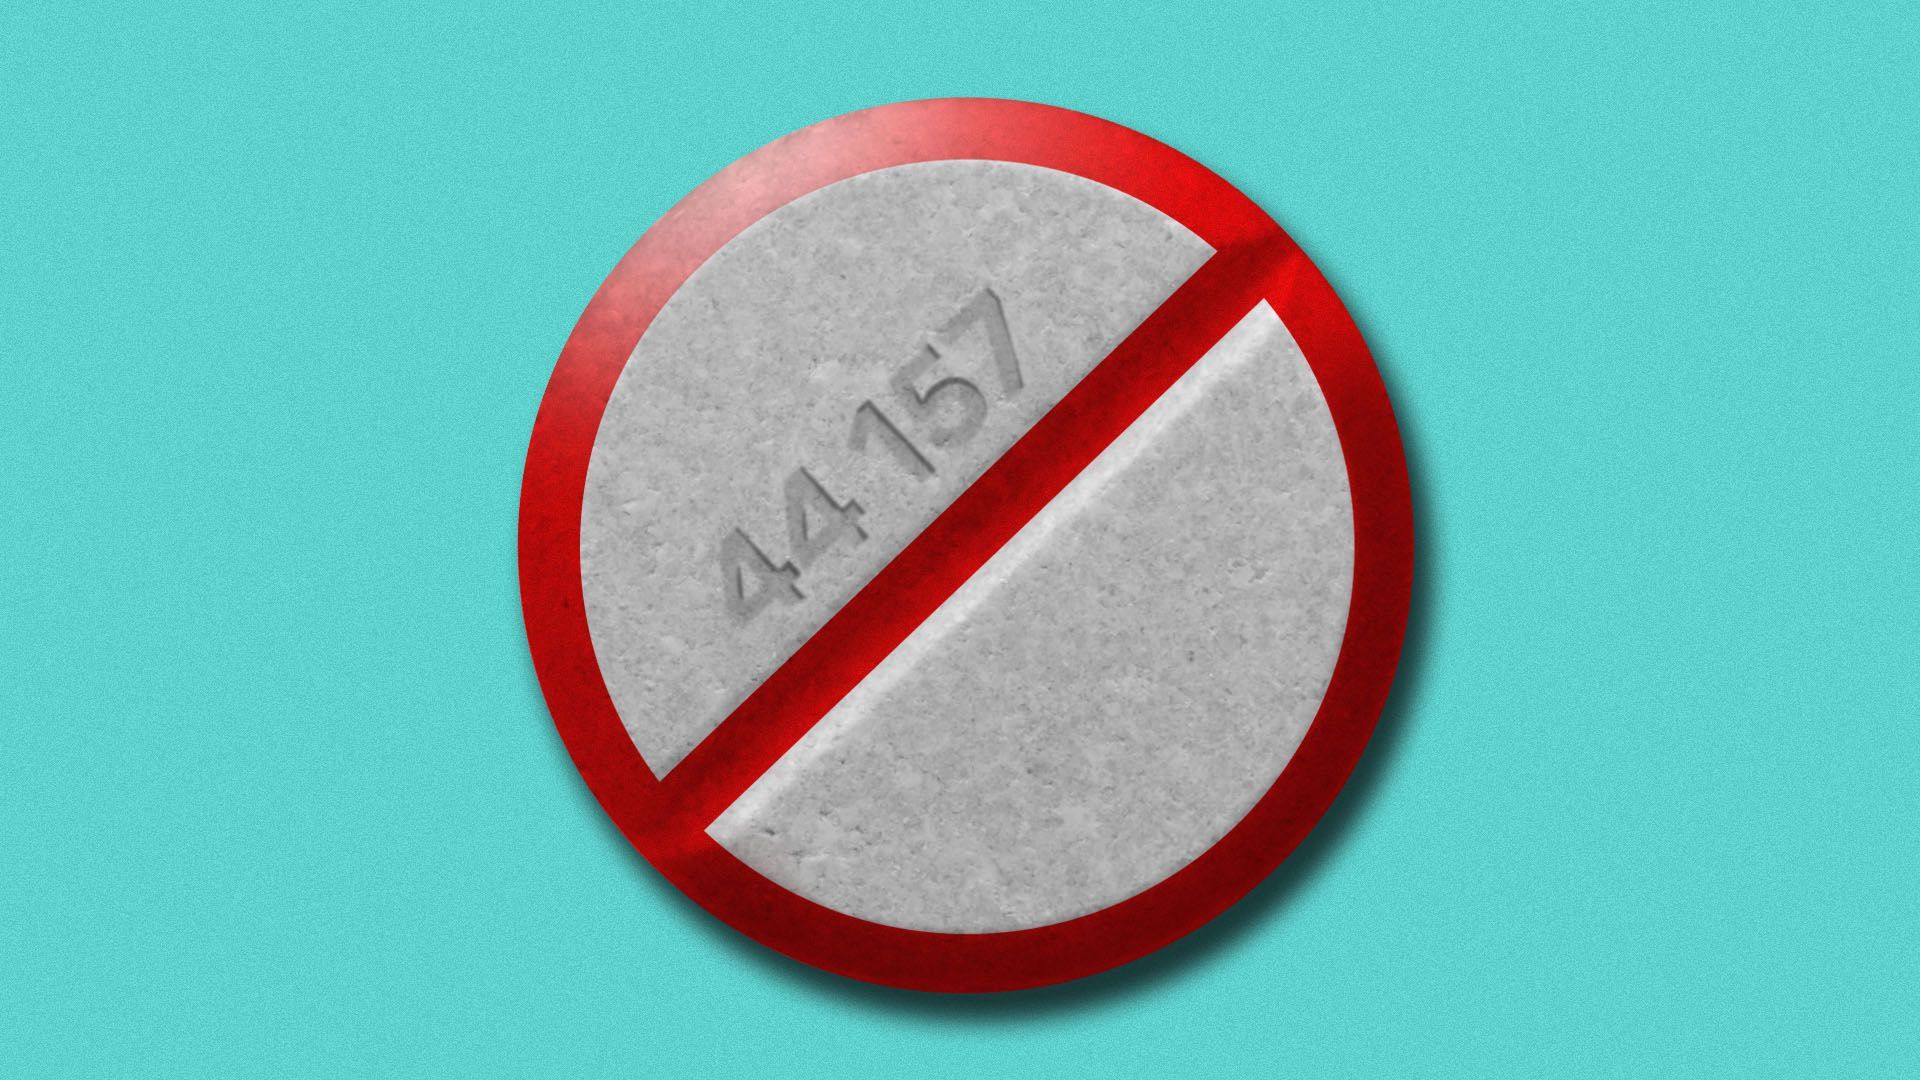 Illustration of an aspiring tablet with a "no" sign over it